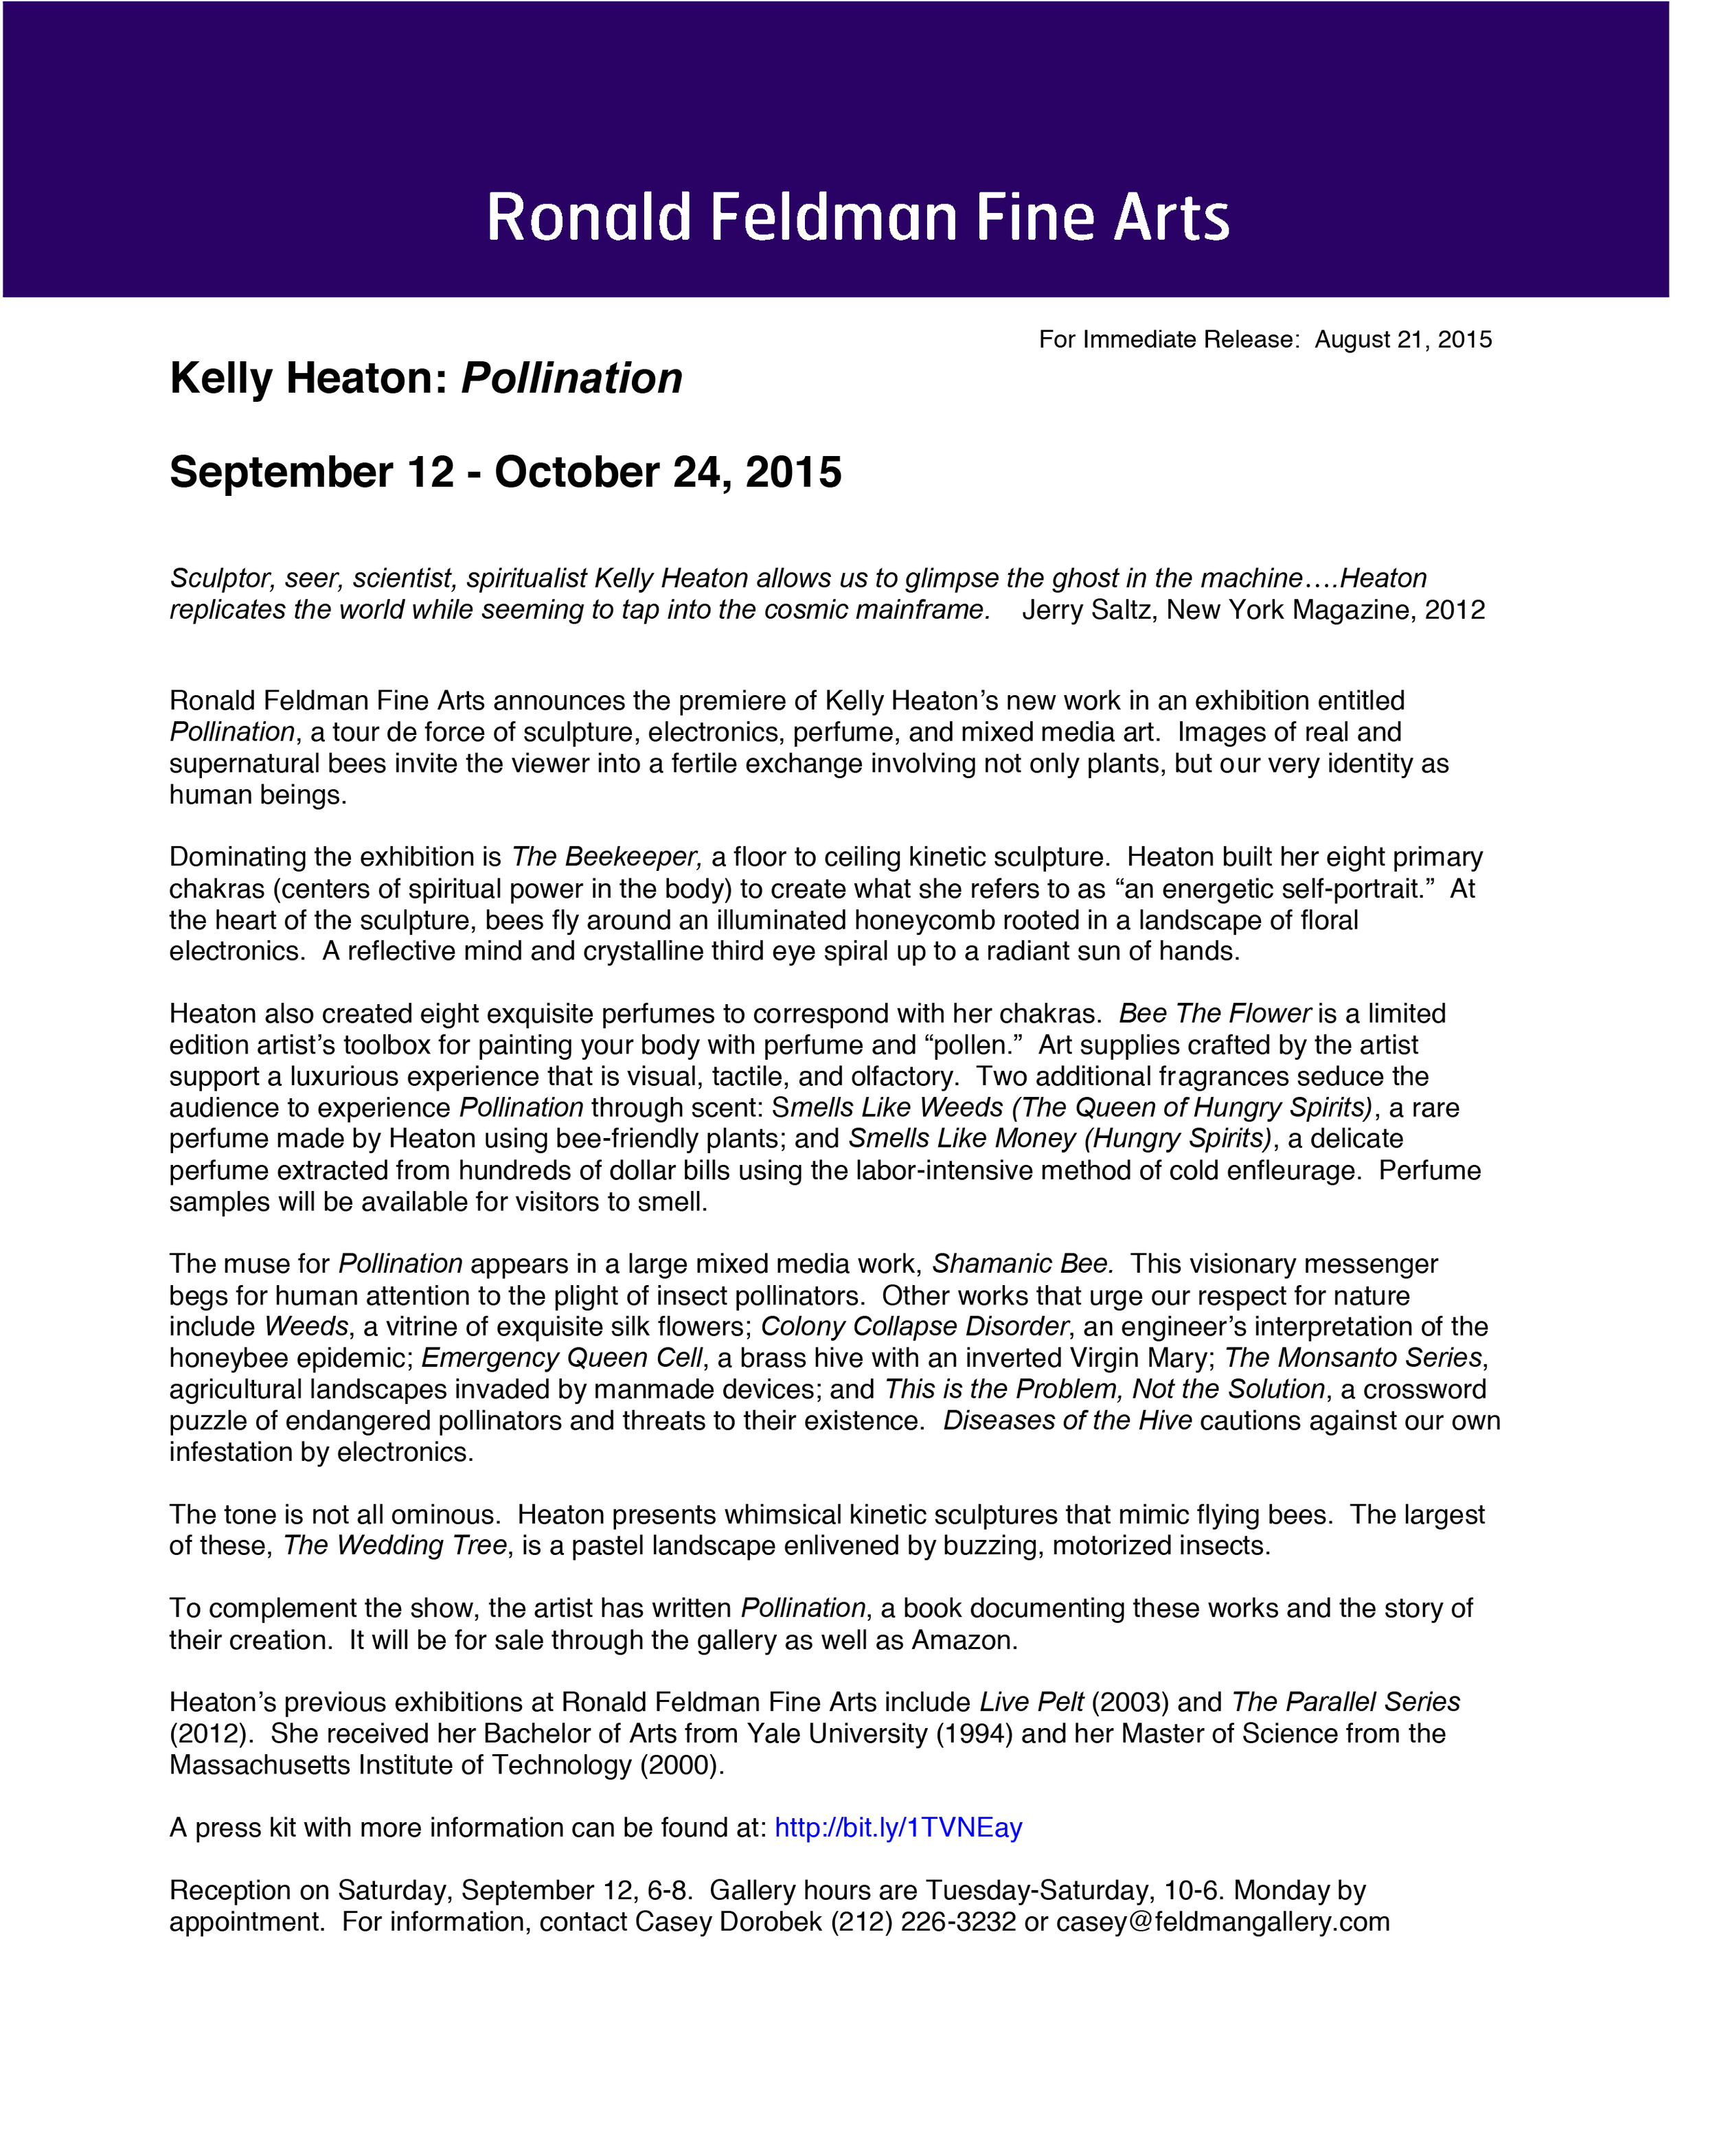 News Press Release And Art Forum Ad For Pollination Kelly Heaton Studio